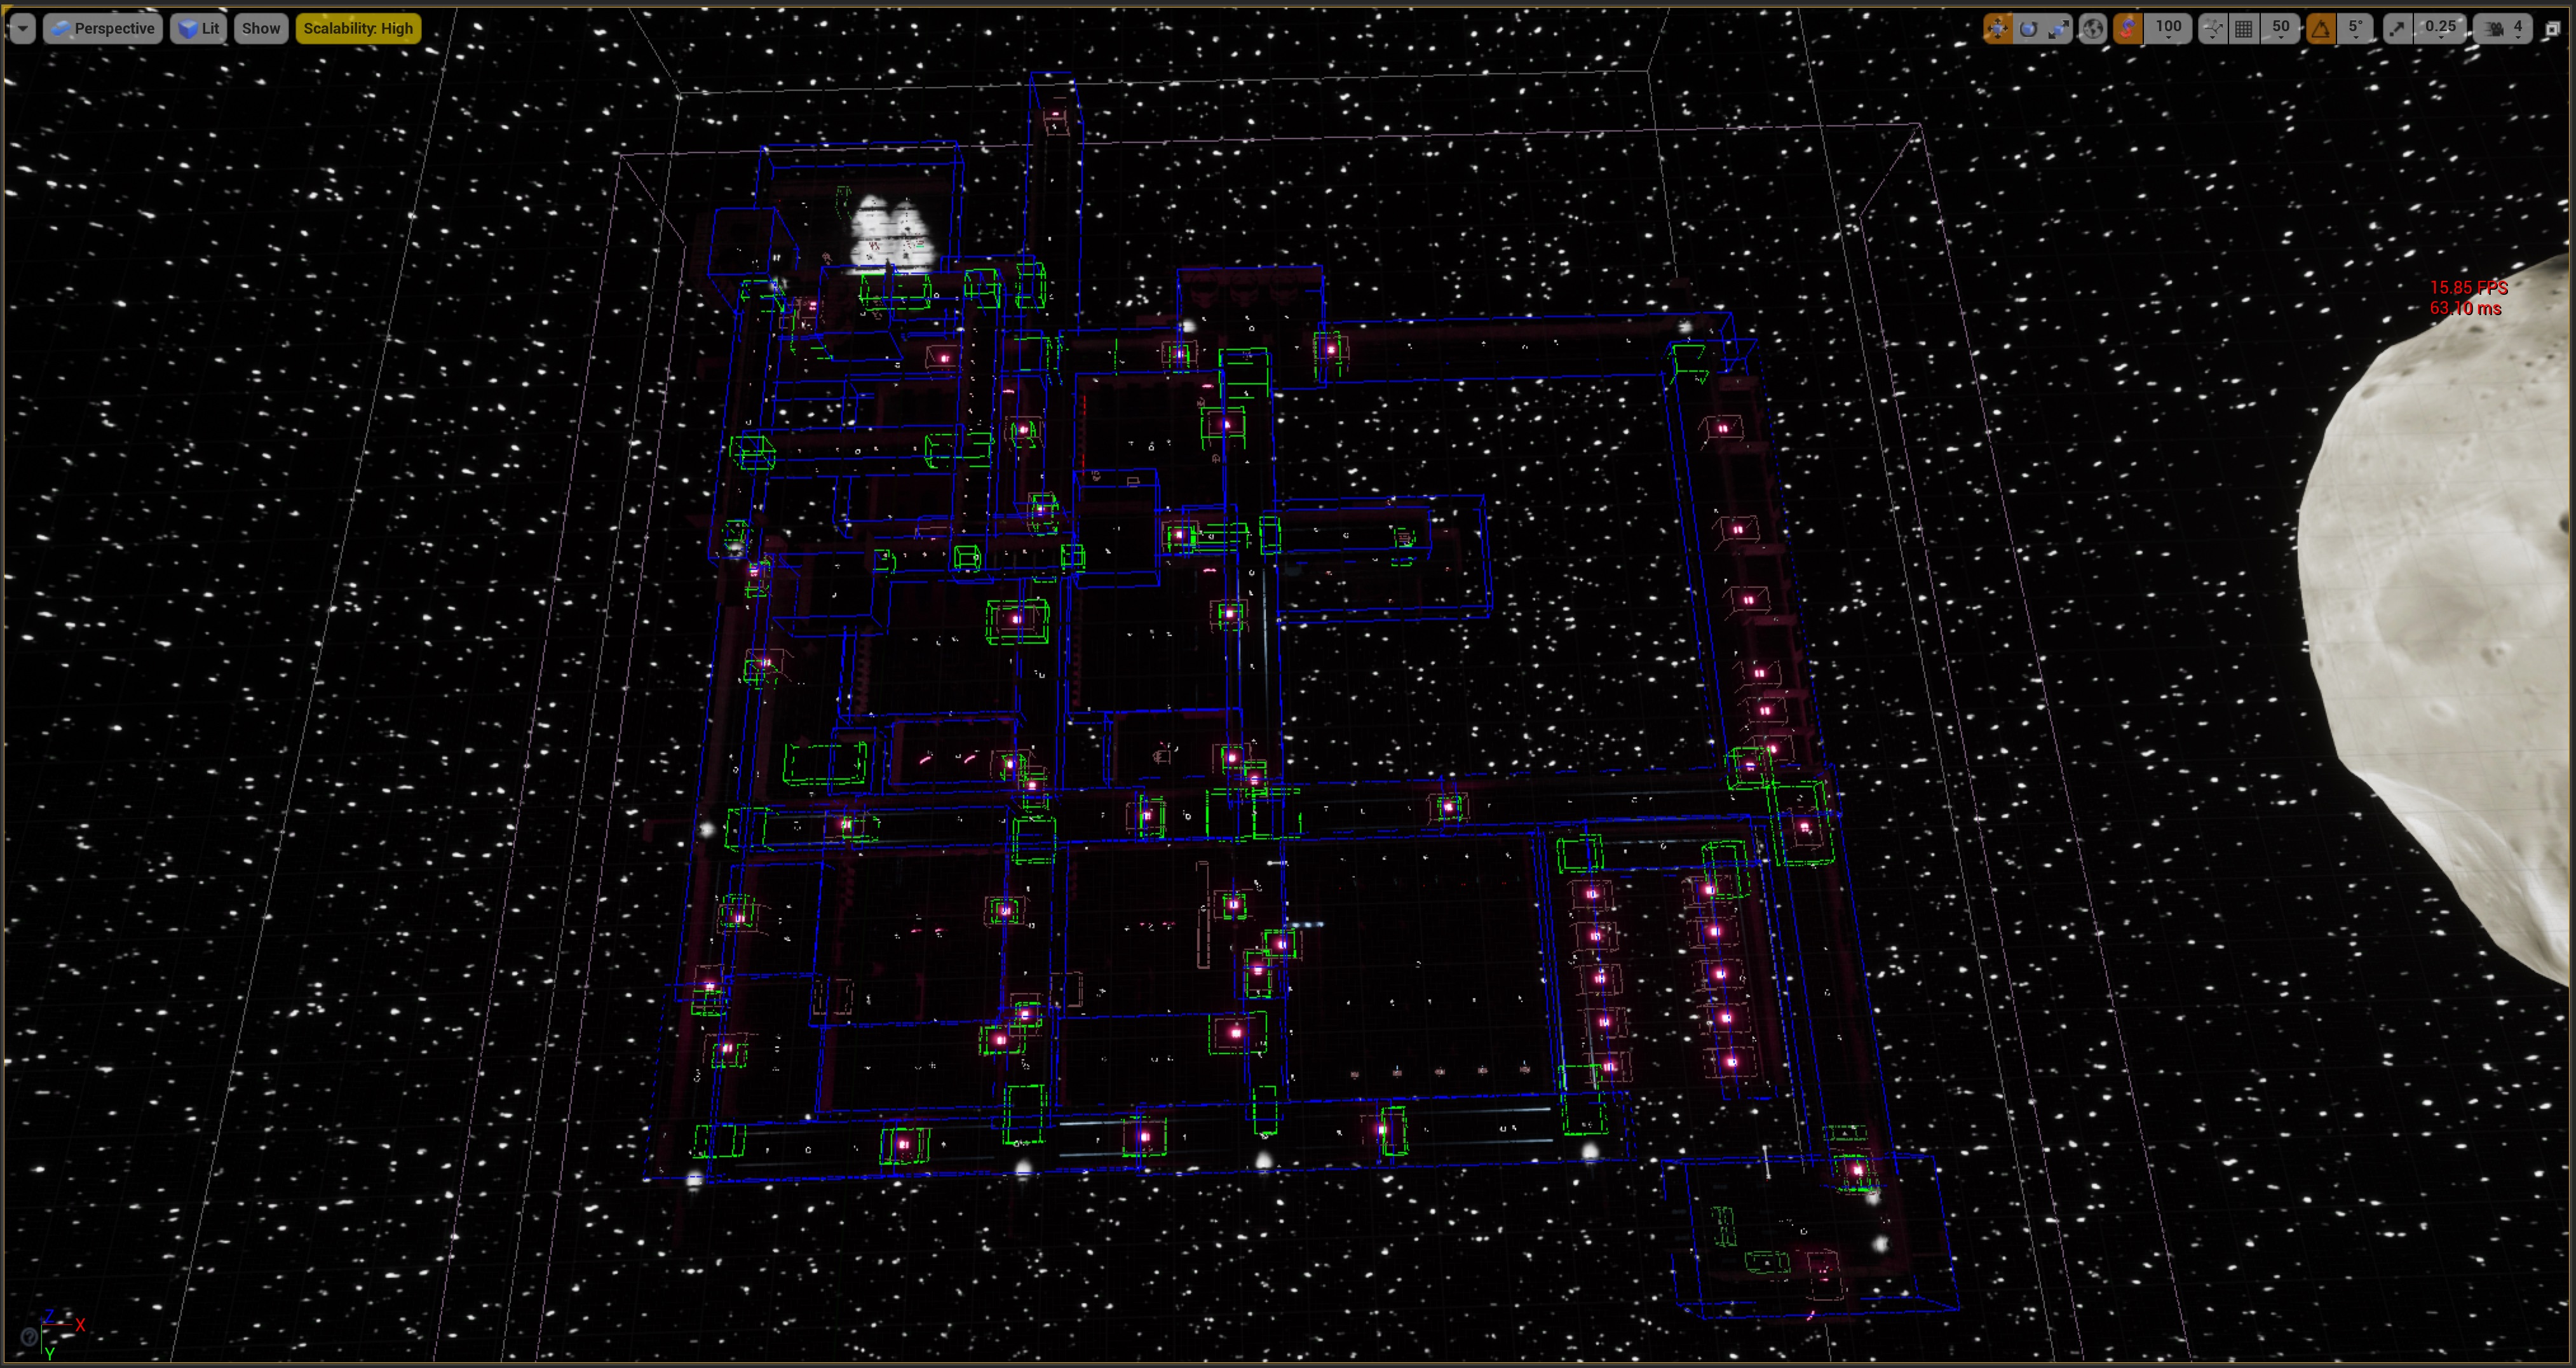 A screenshot of the map with blue and green cubes representing light zones and portals.